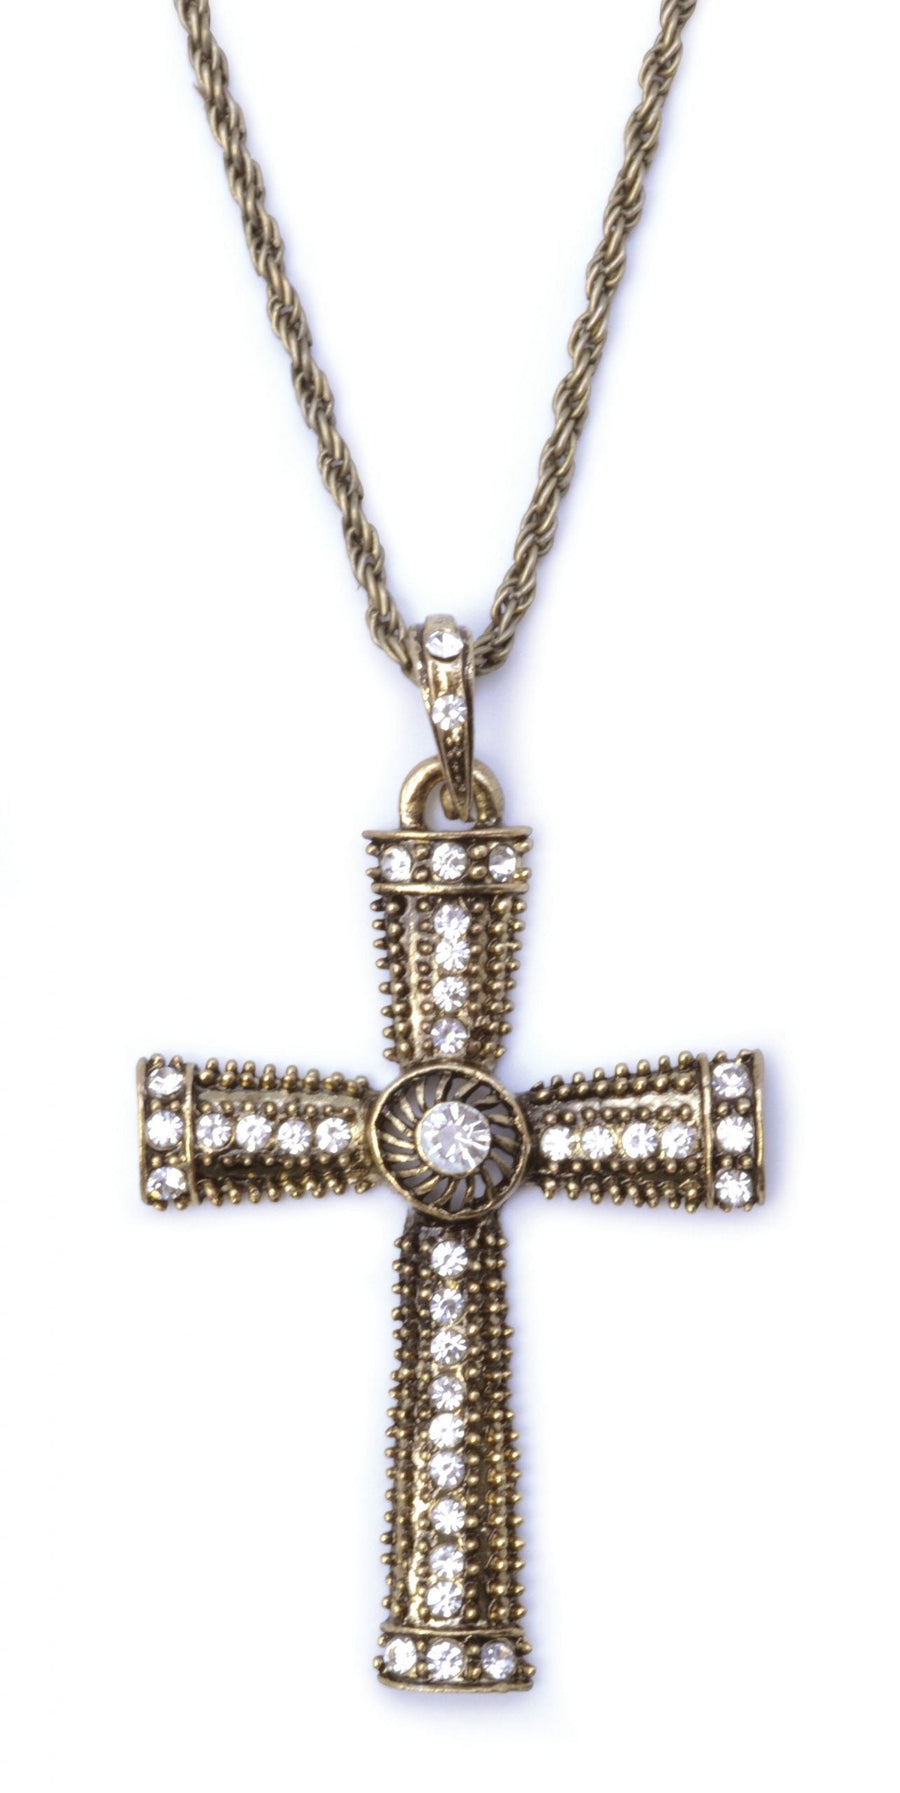 Jewelled Cross Necklace Costume Accessory_1